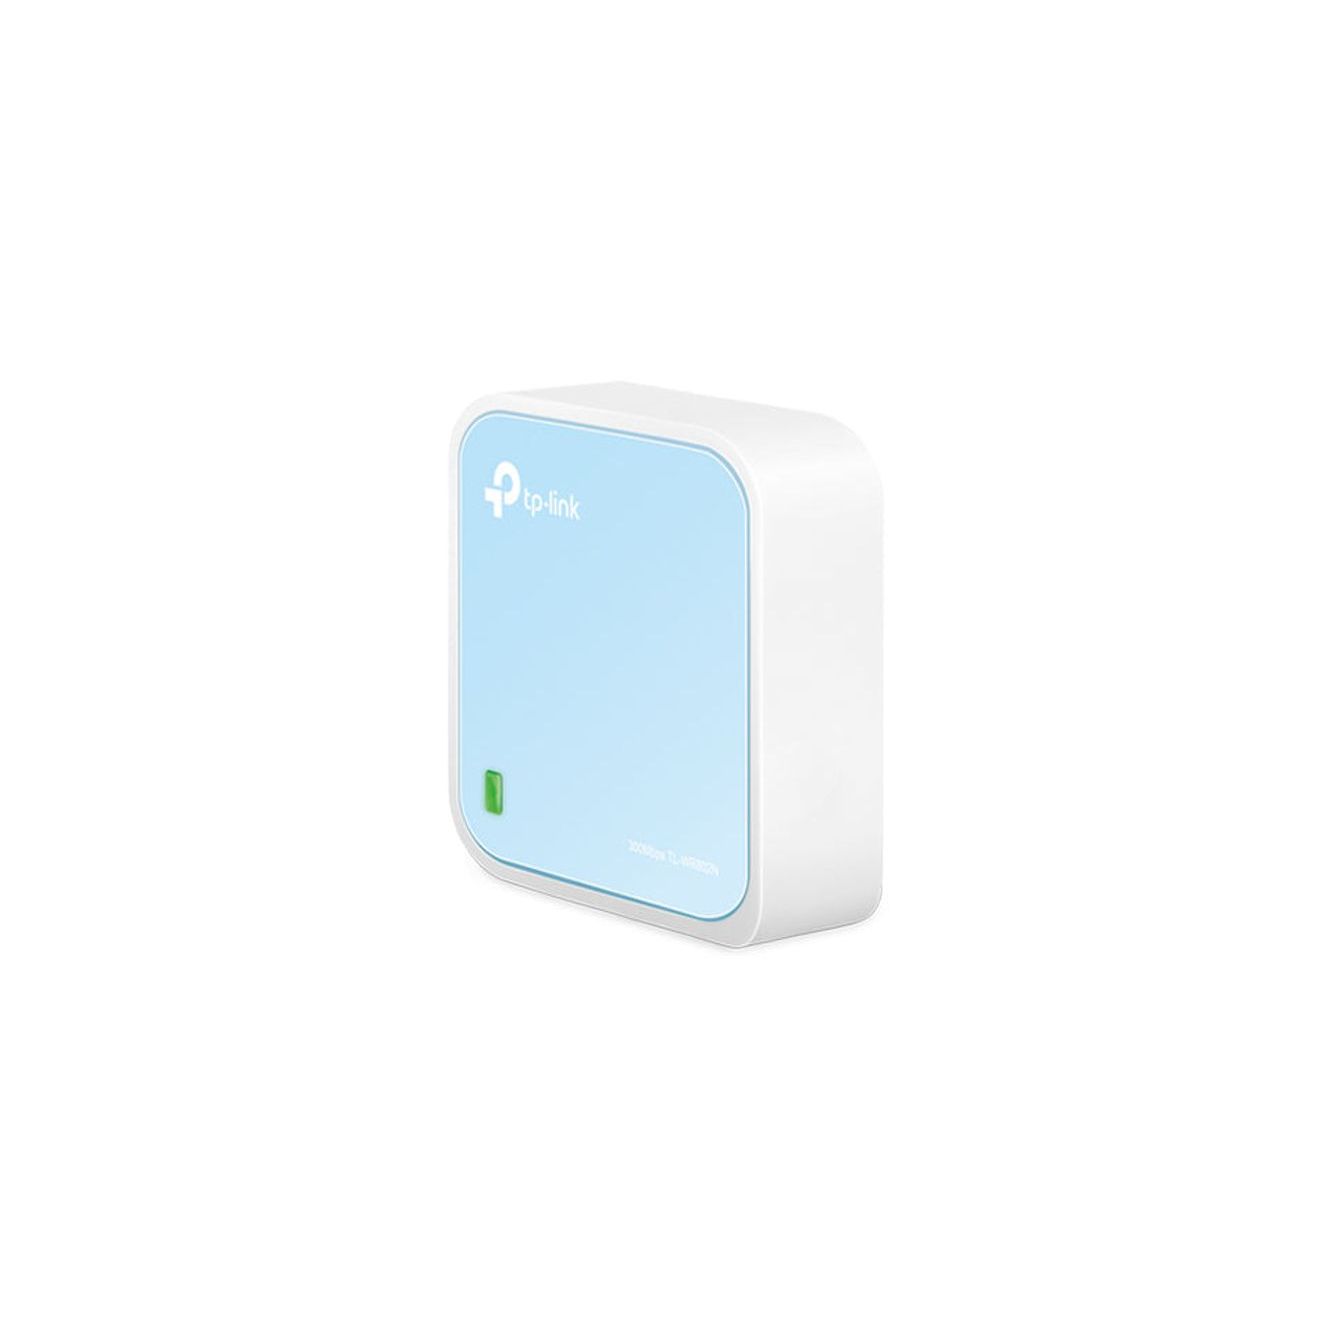 TL-WR802N - TP-LINK 300Mbps Wireless N Nano Router